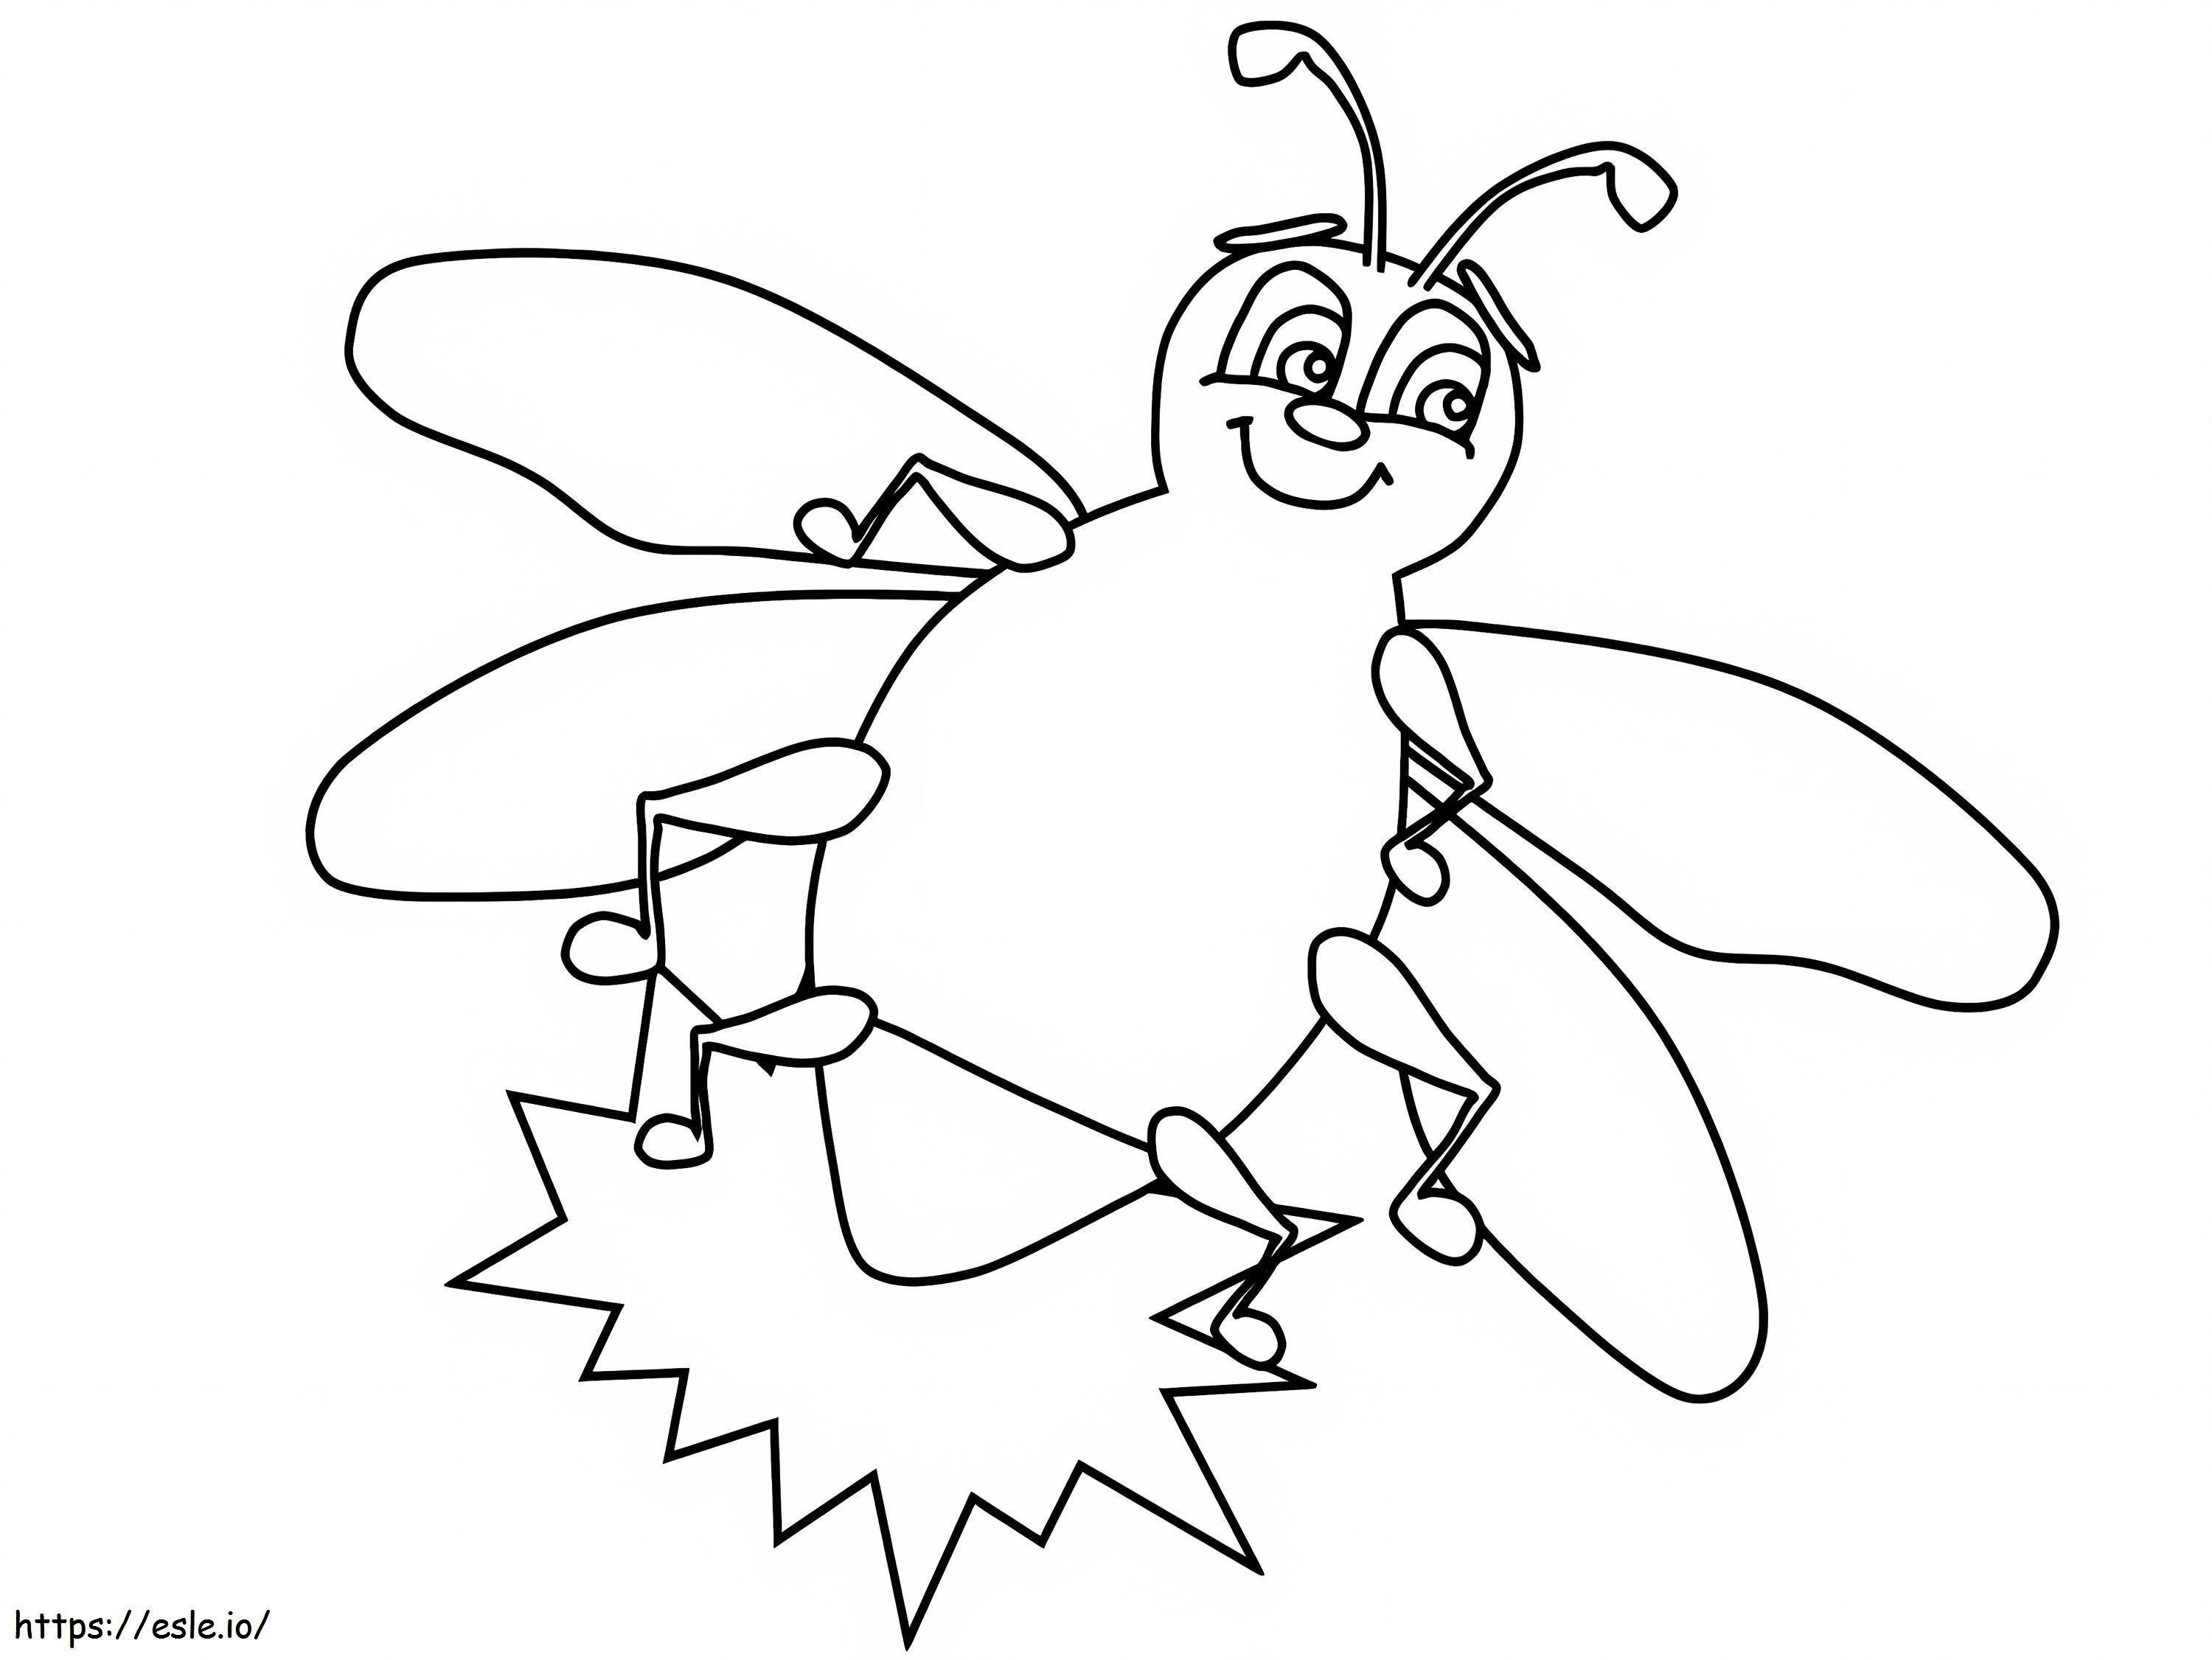 Smiling Firefly coloring page